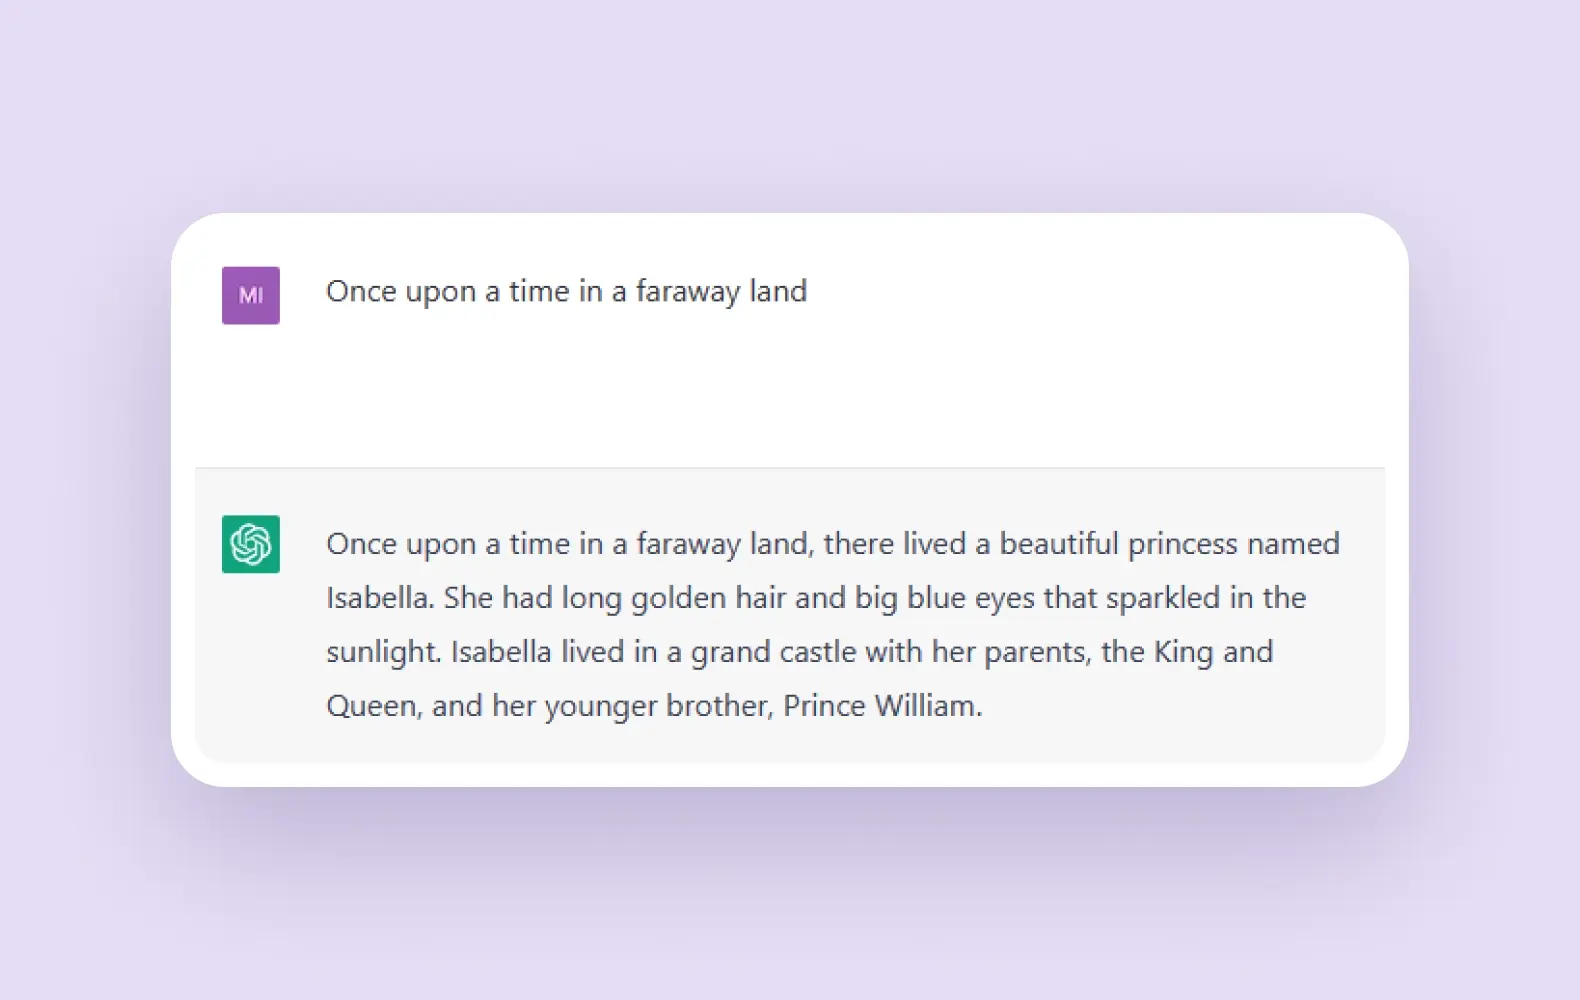 Example of a prompt for a fairytale followed by AI-generated text, based on the prompt.